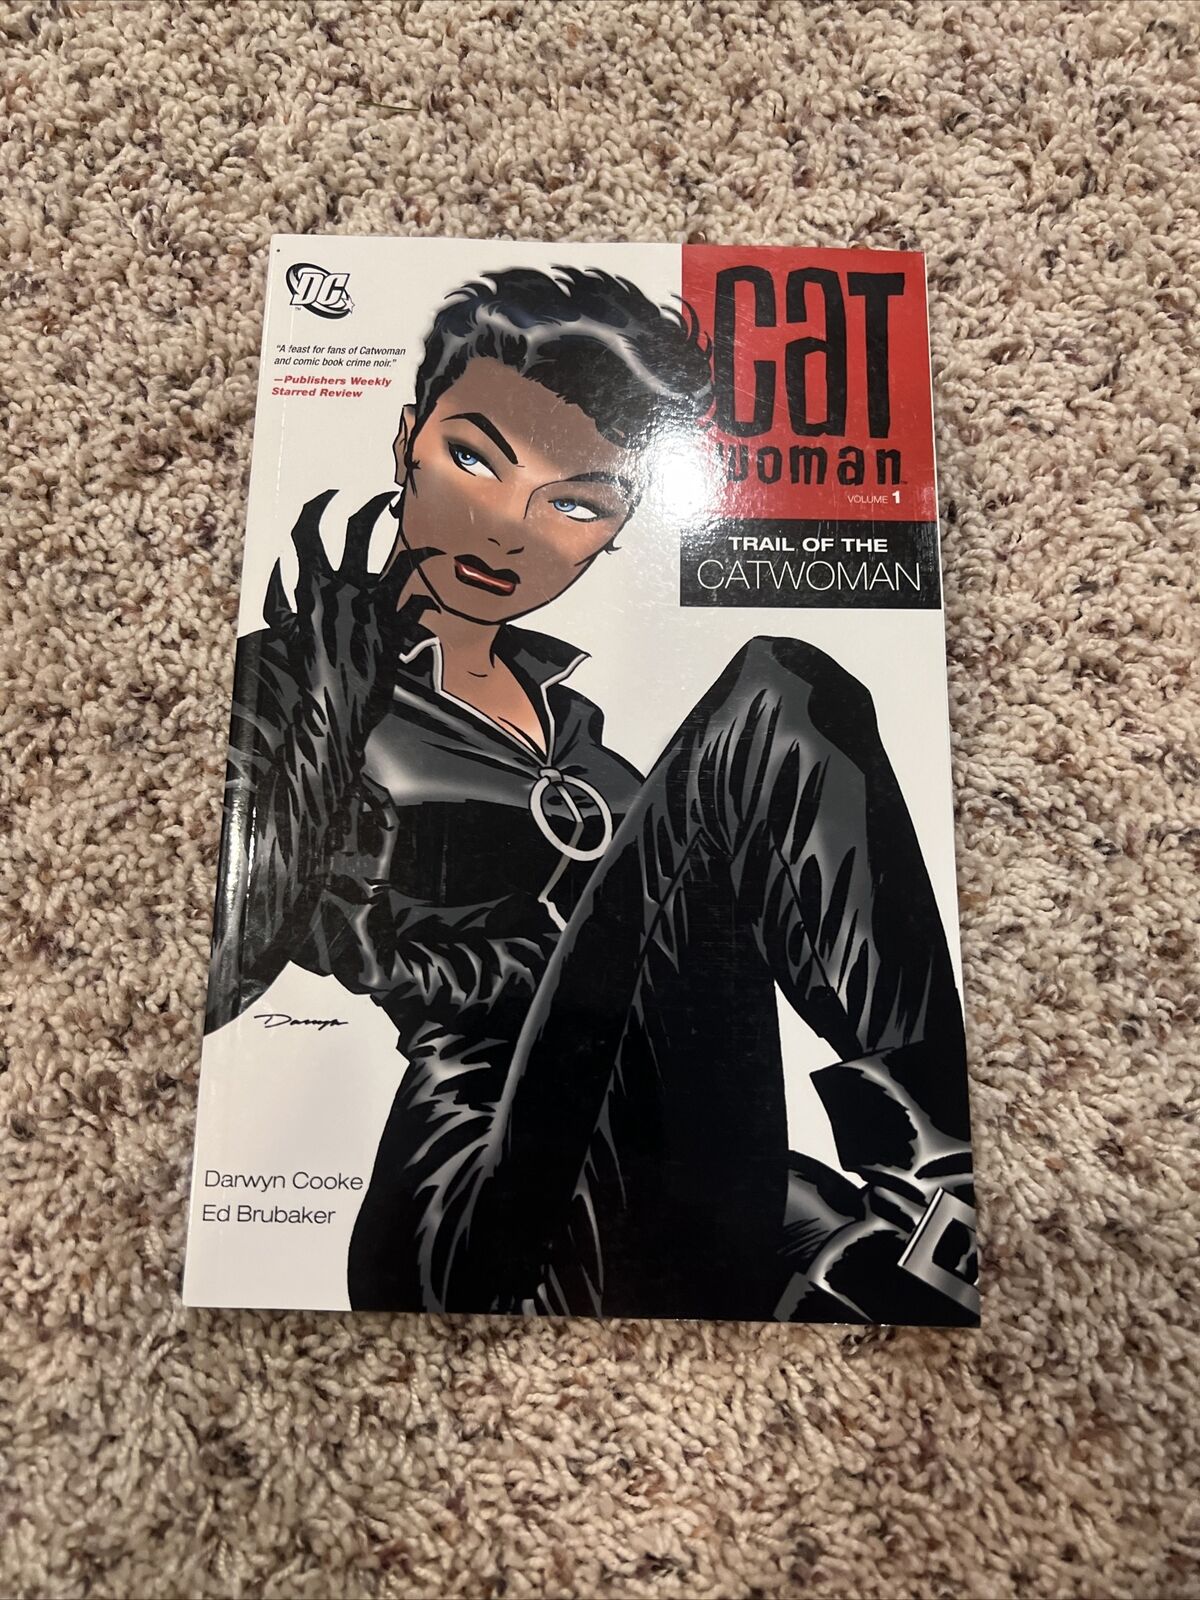 CATWOMAN Vol 1 Trail of the Catwoman Trade Paperback